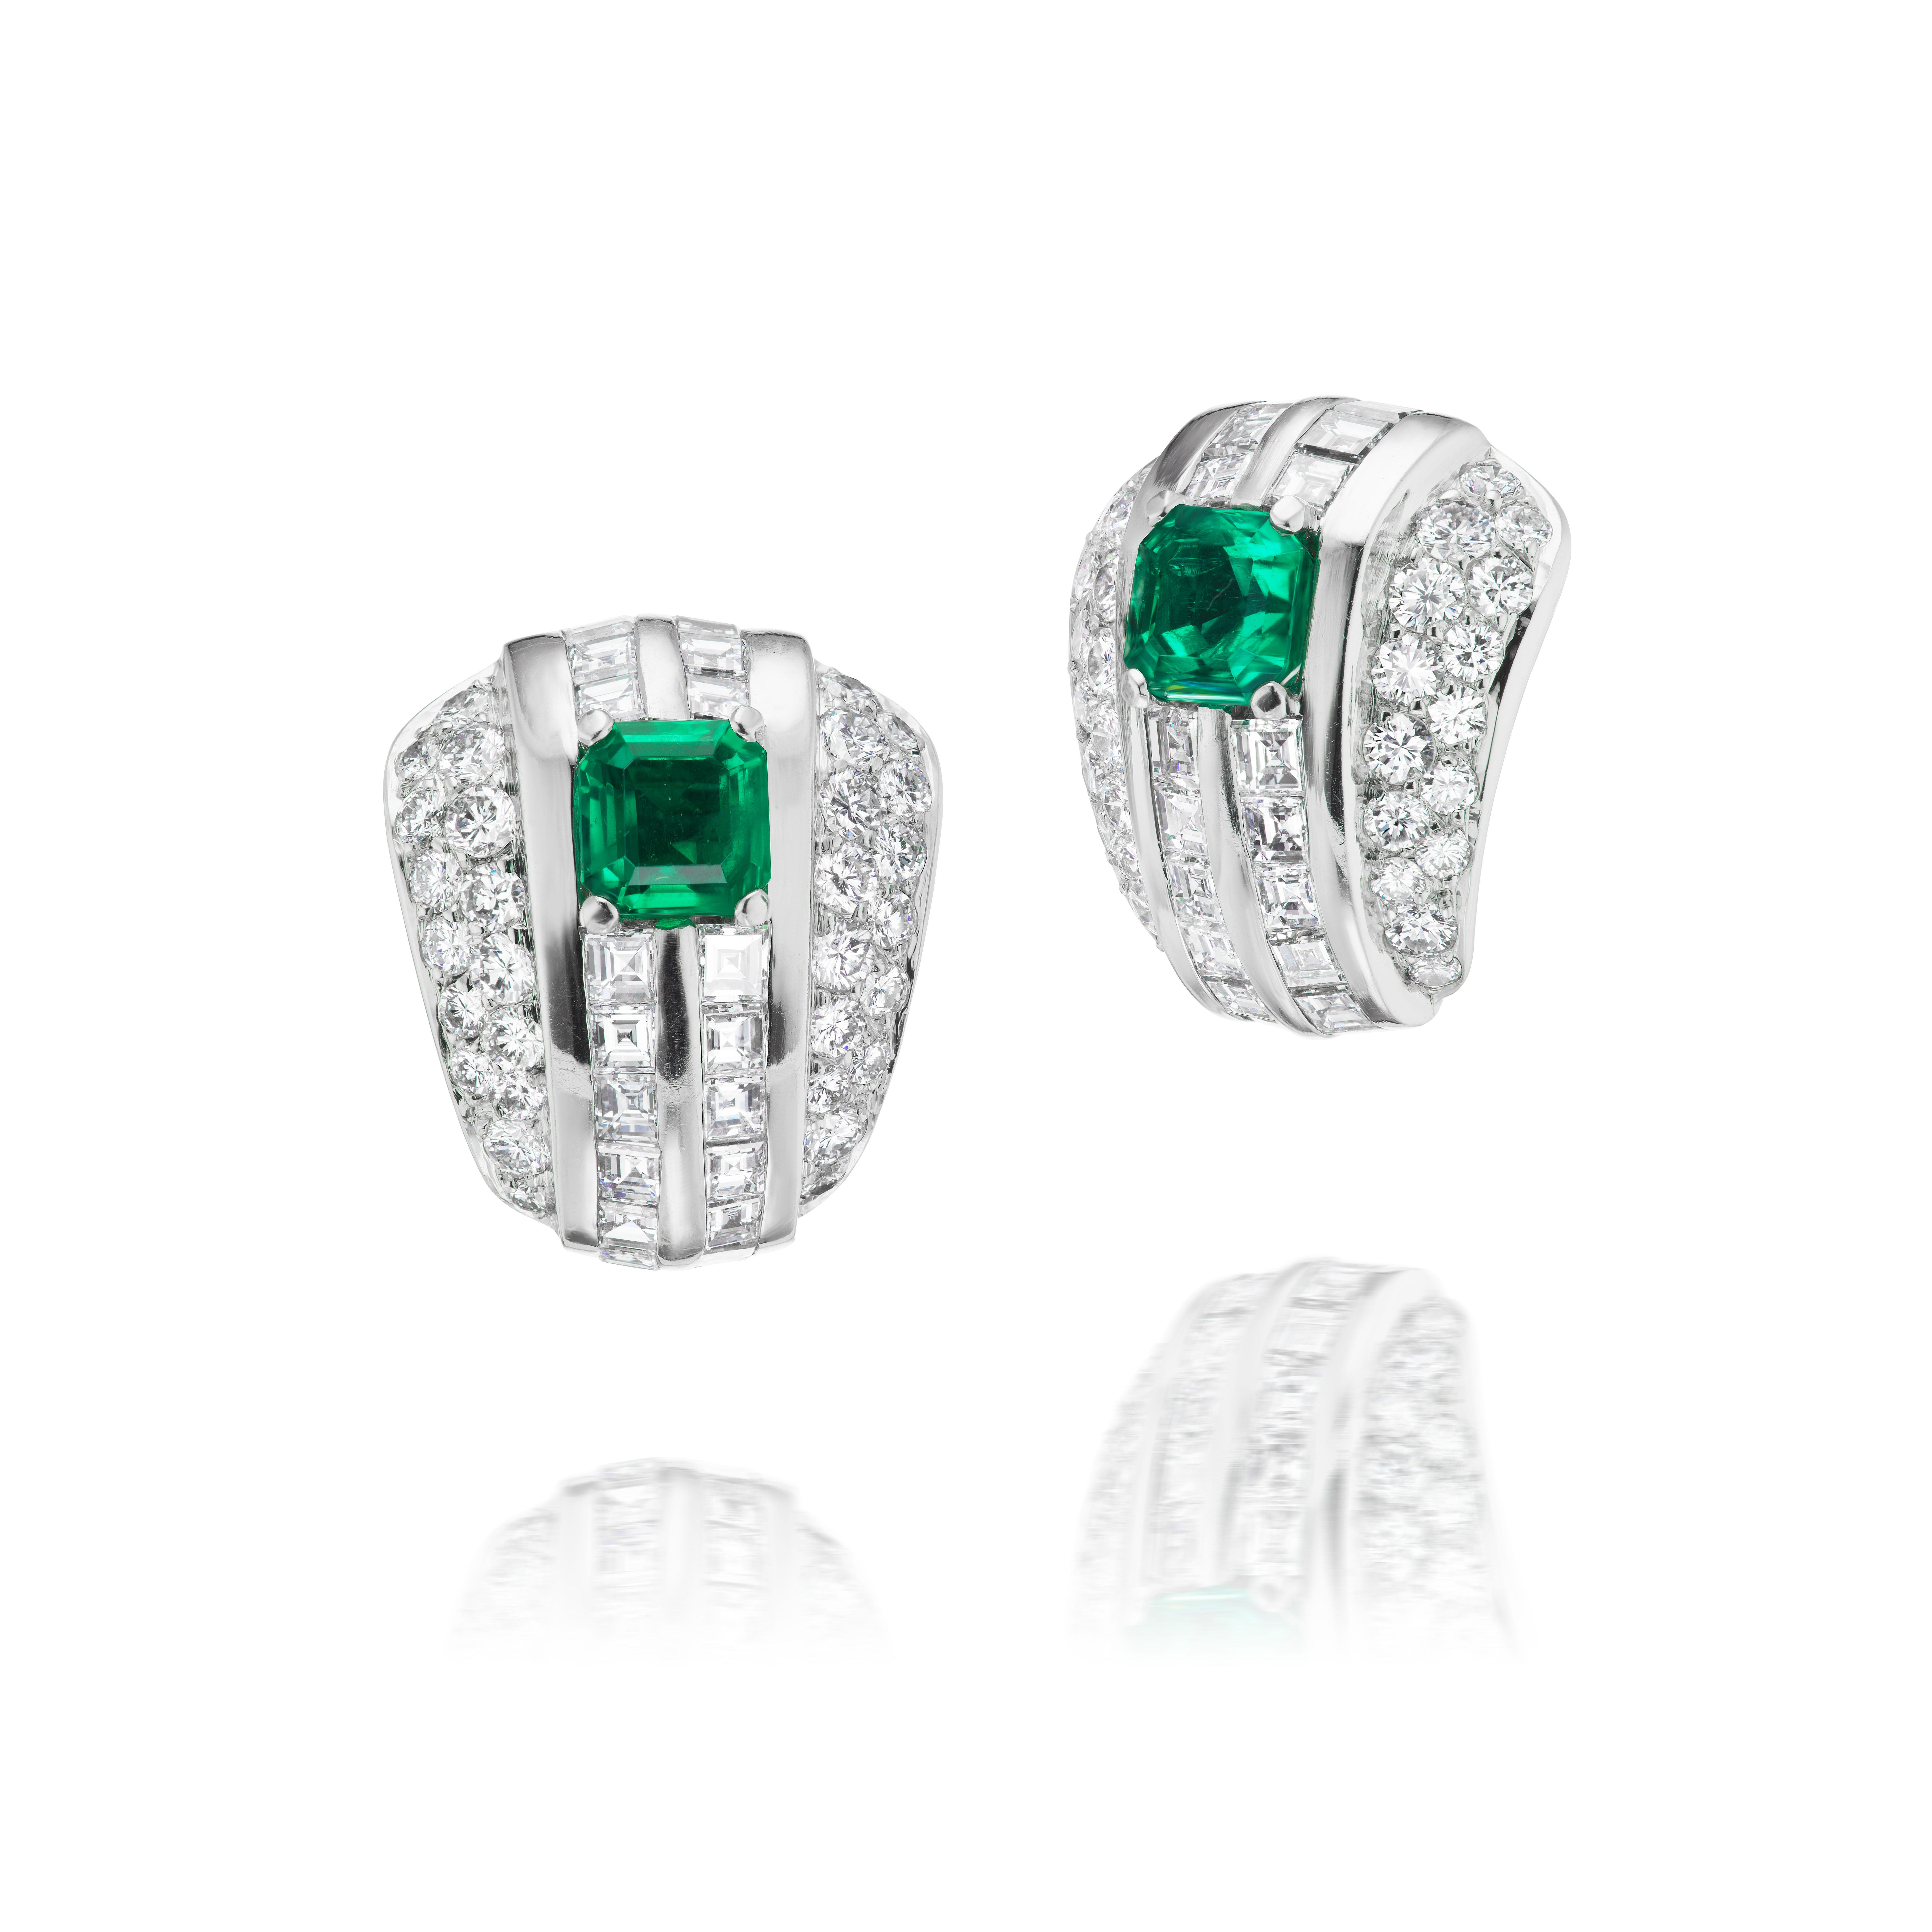 The elegant pair of retro style scalloped earclips features 2 green emeralds of excellent saturation and transparency likely colombian and likely moderate to minor clarity enhancement weighing a total of 3.31 carats. The emeralds are each